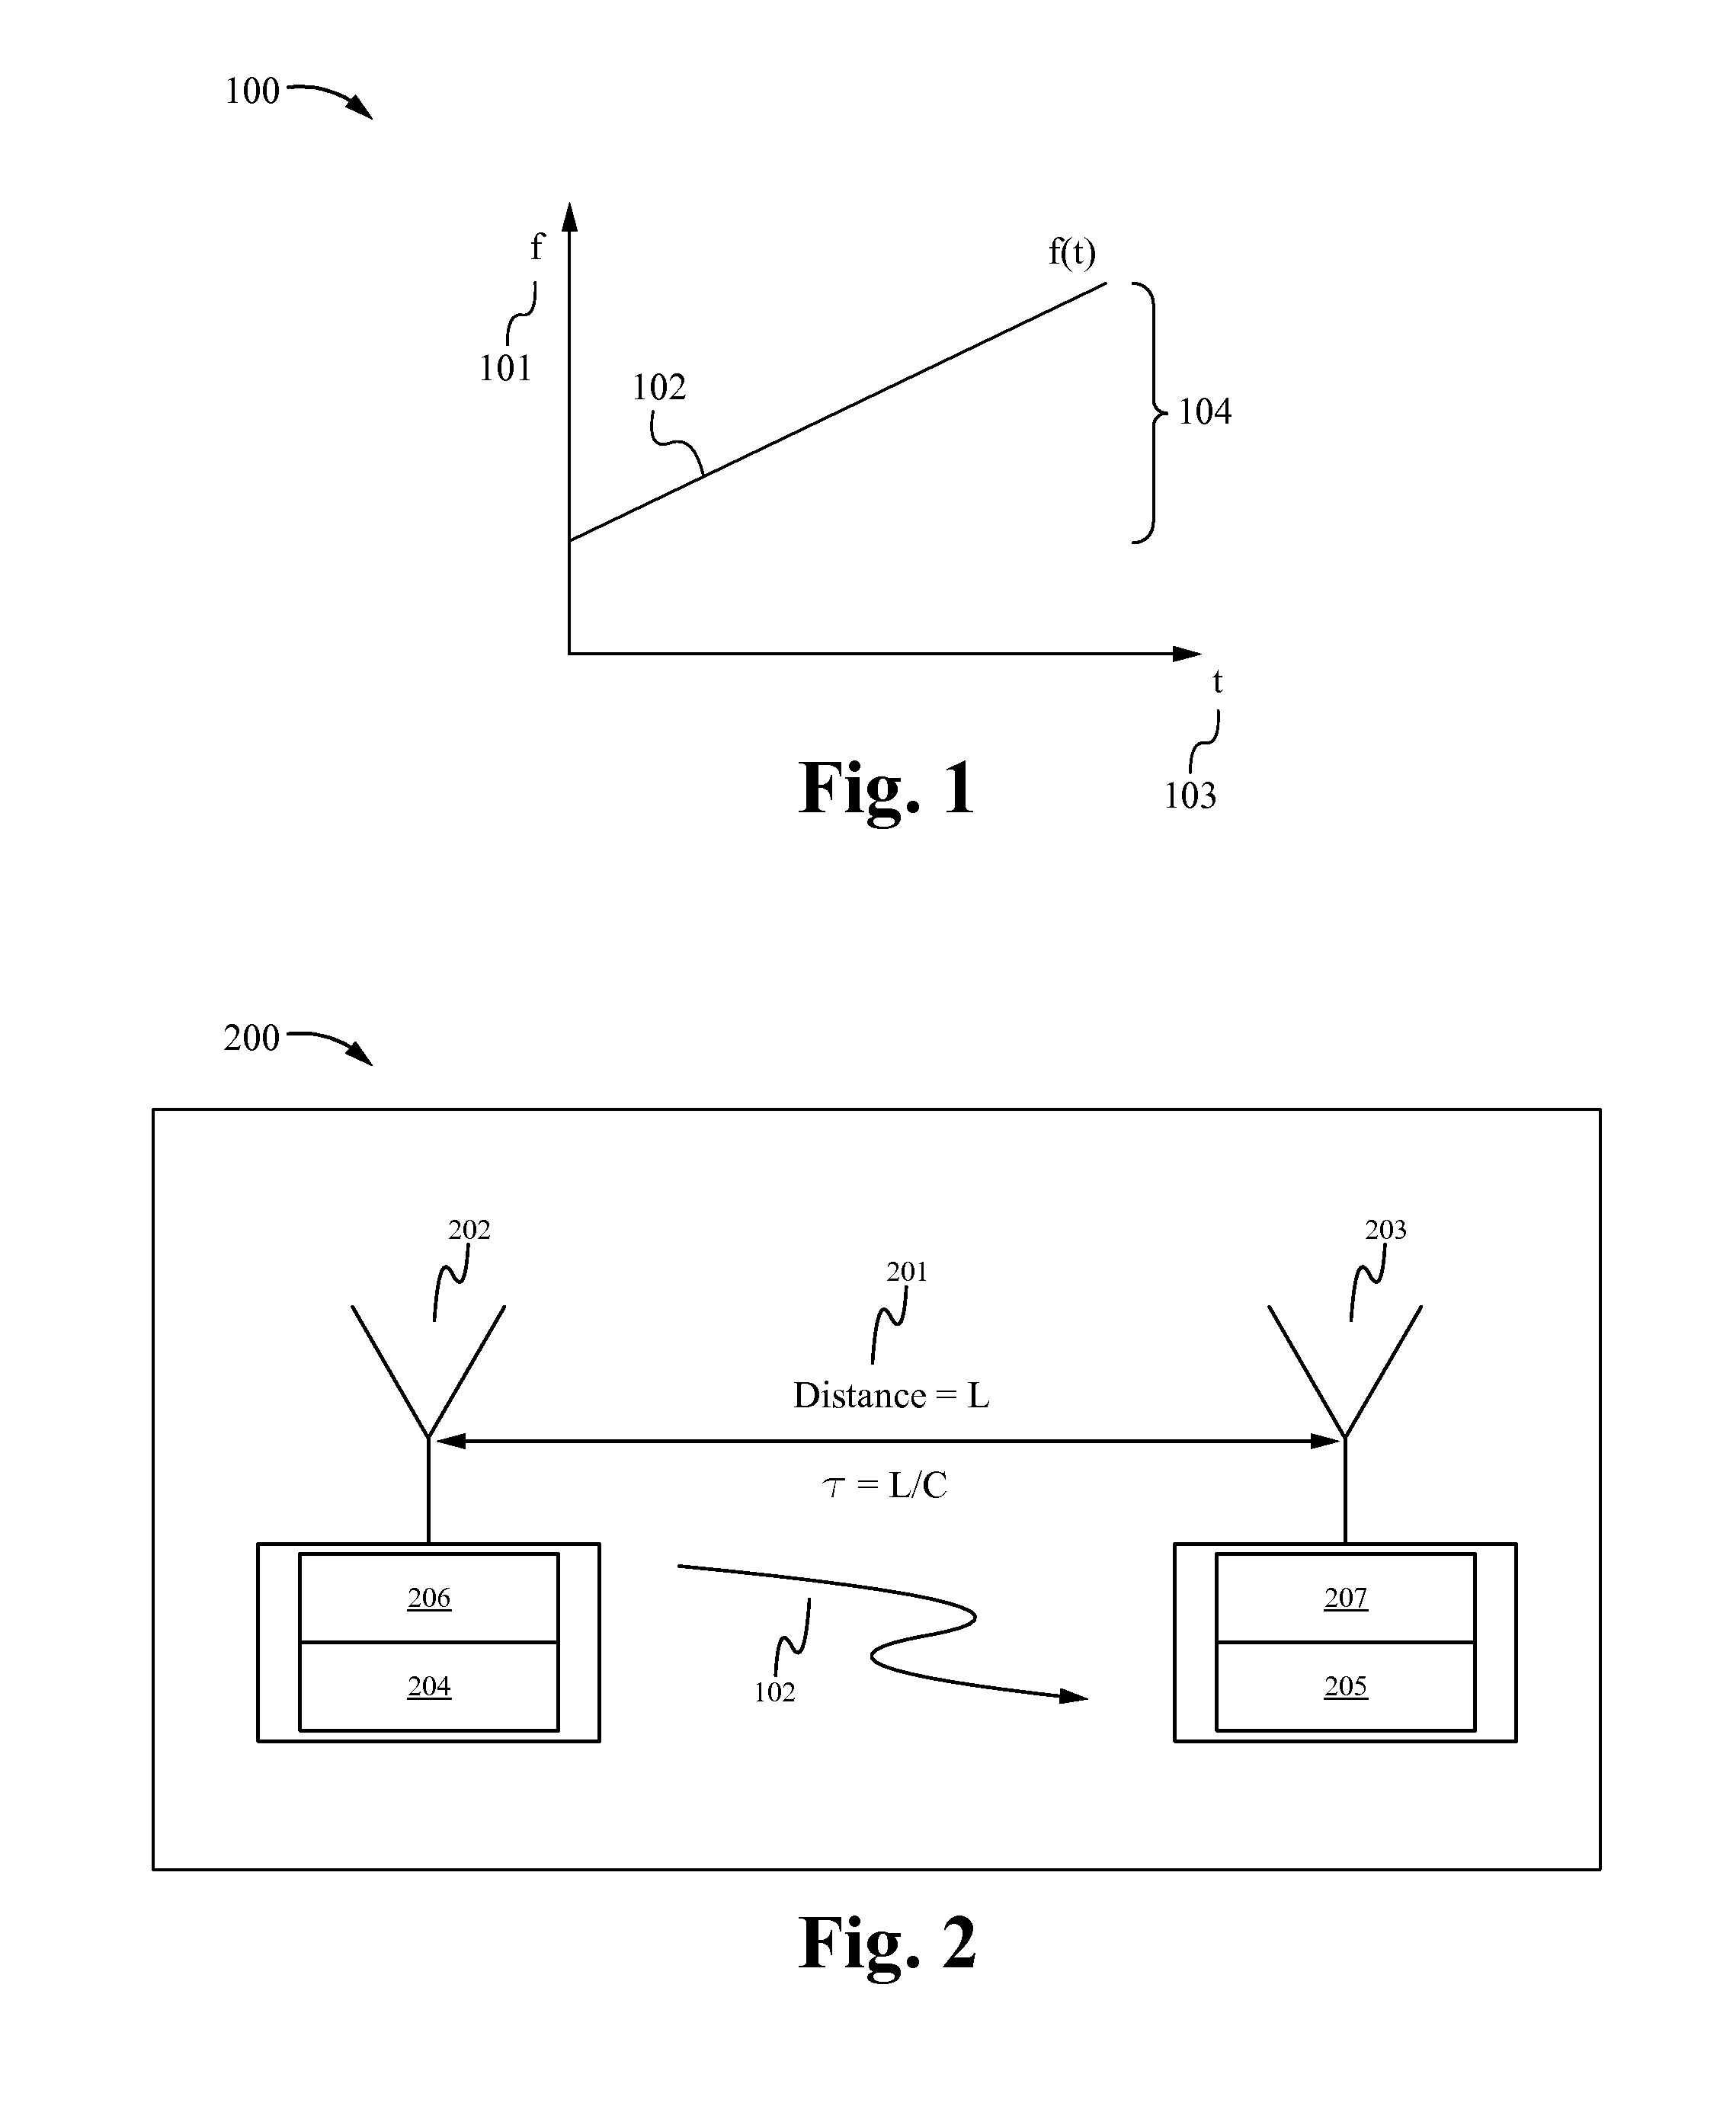 System and method for enhanced point-to-point direction finding